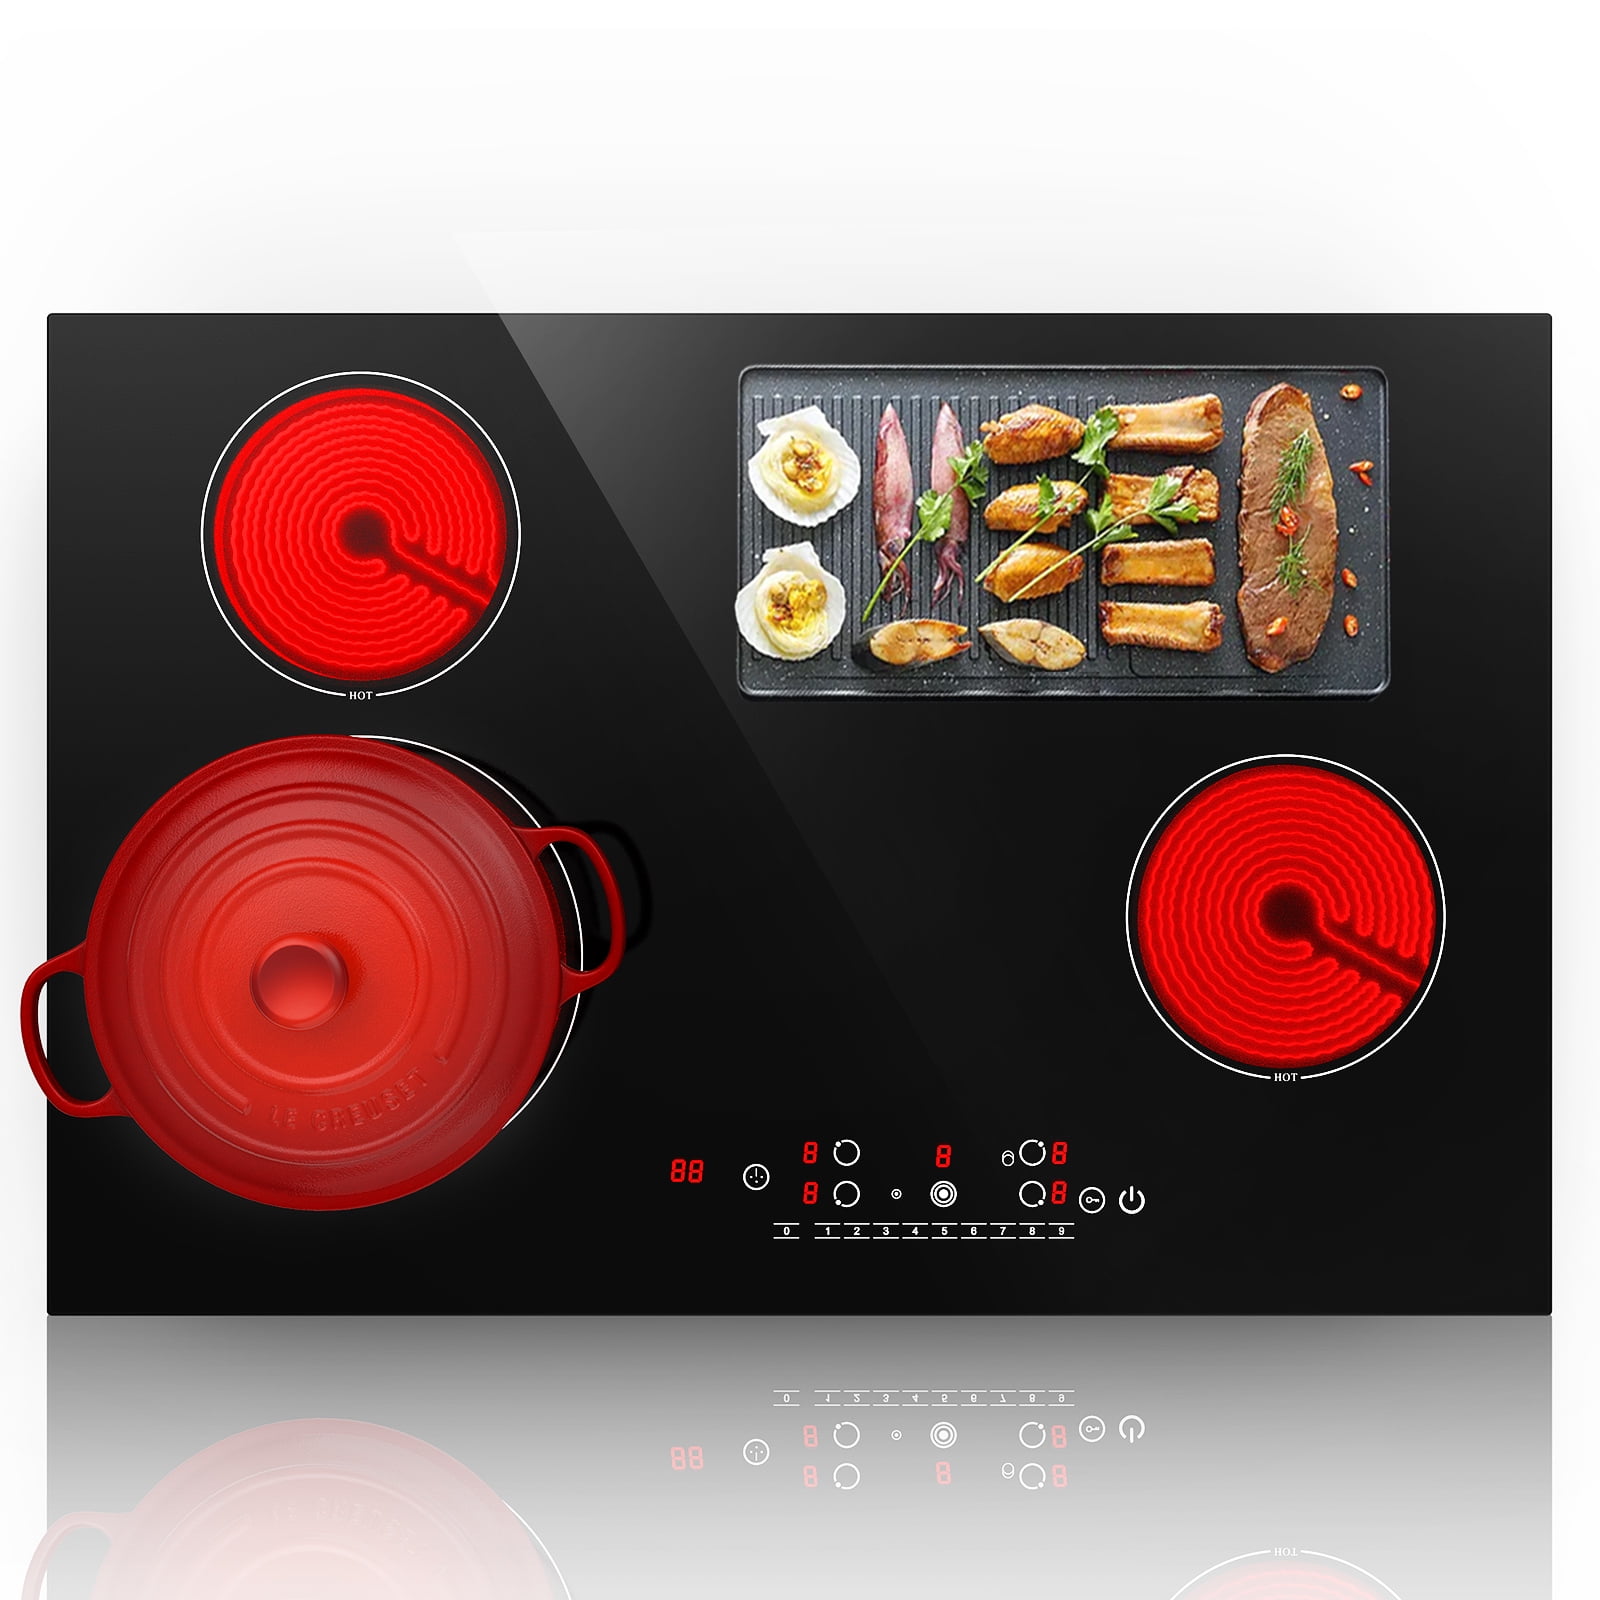 GTKZW Electric Radiant Cooktop 4 Burner 6300W Ceramic Cooktop 30 Inch Built-in Electric Stove Top with LED Touch Screen Electric Cooktop 9 Heating Level 